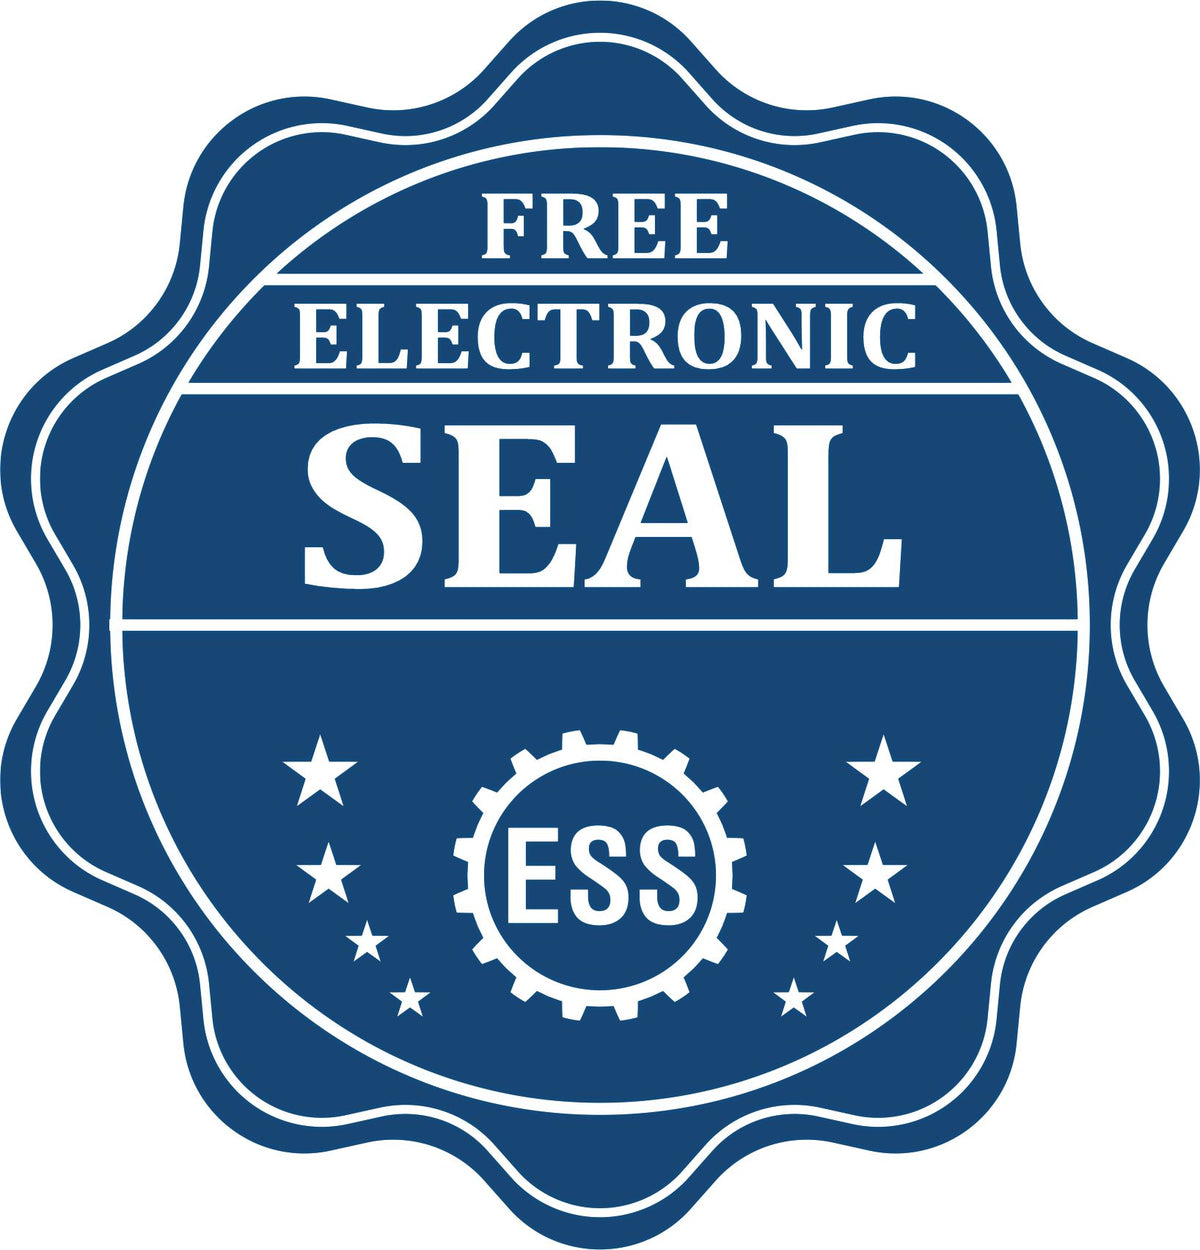 A badge showing a free electronic seal for the Soft Arizona Professional Geologist Seal with stars and the ESS gear on the emblem.